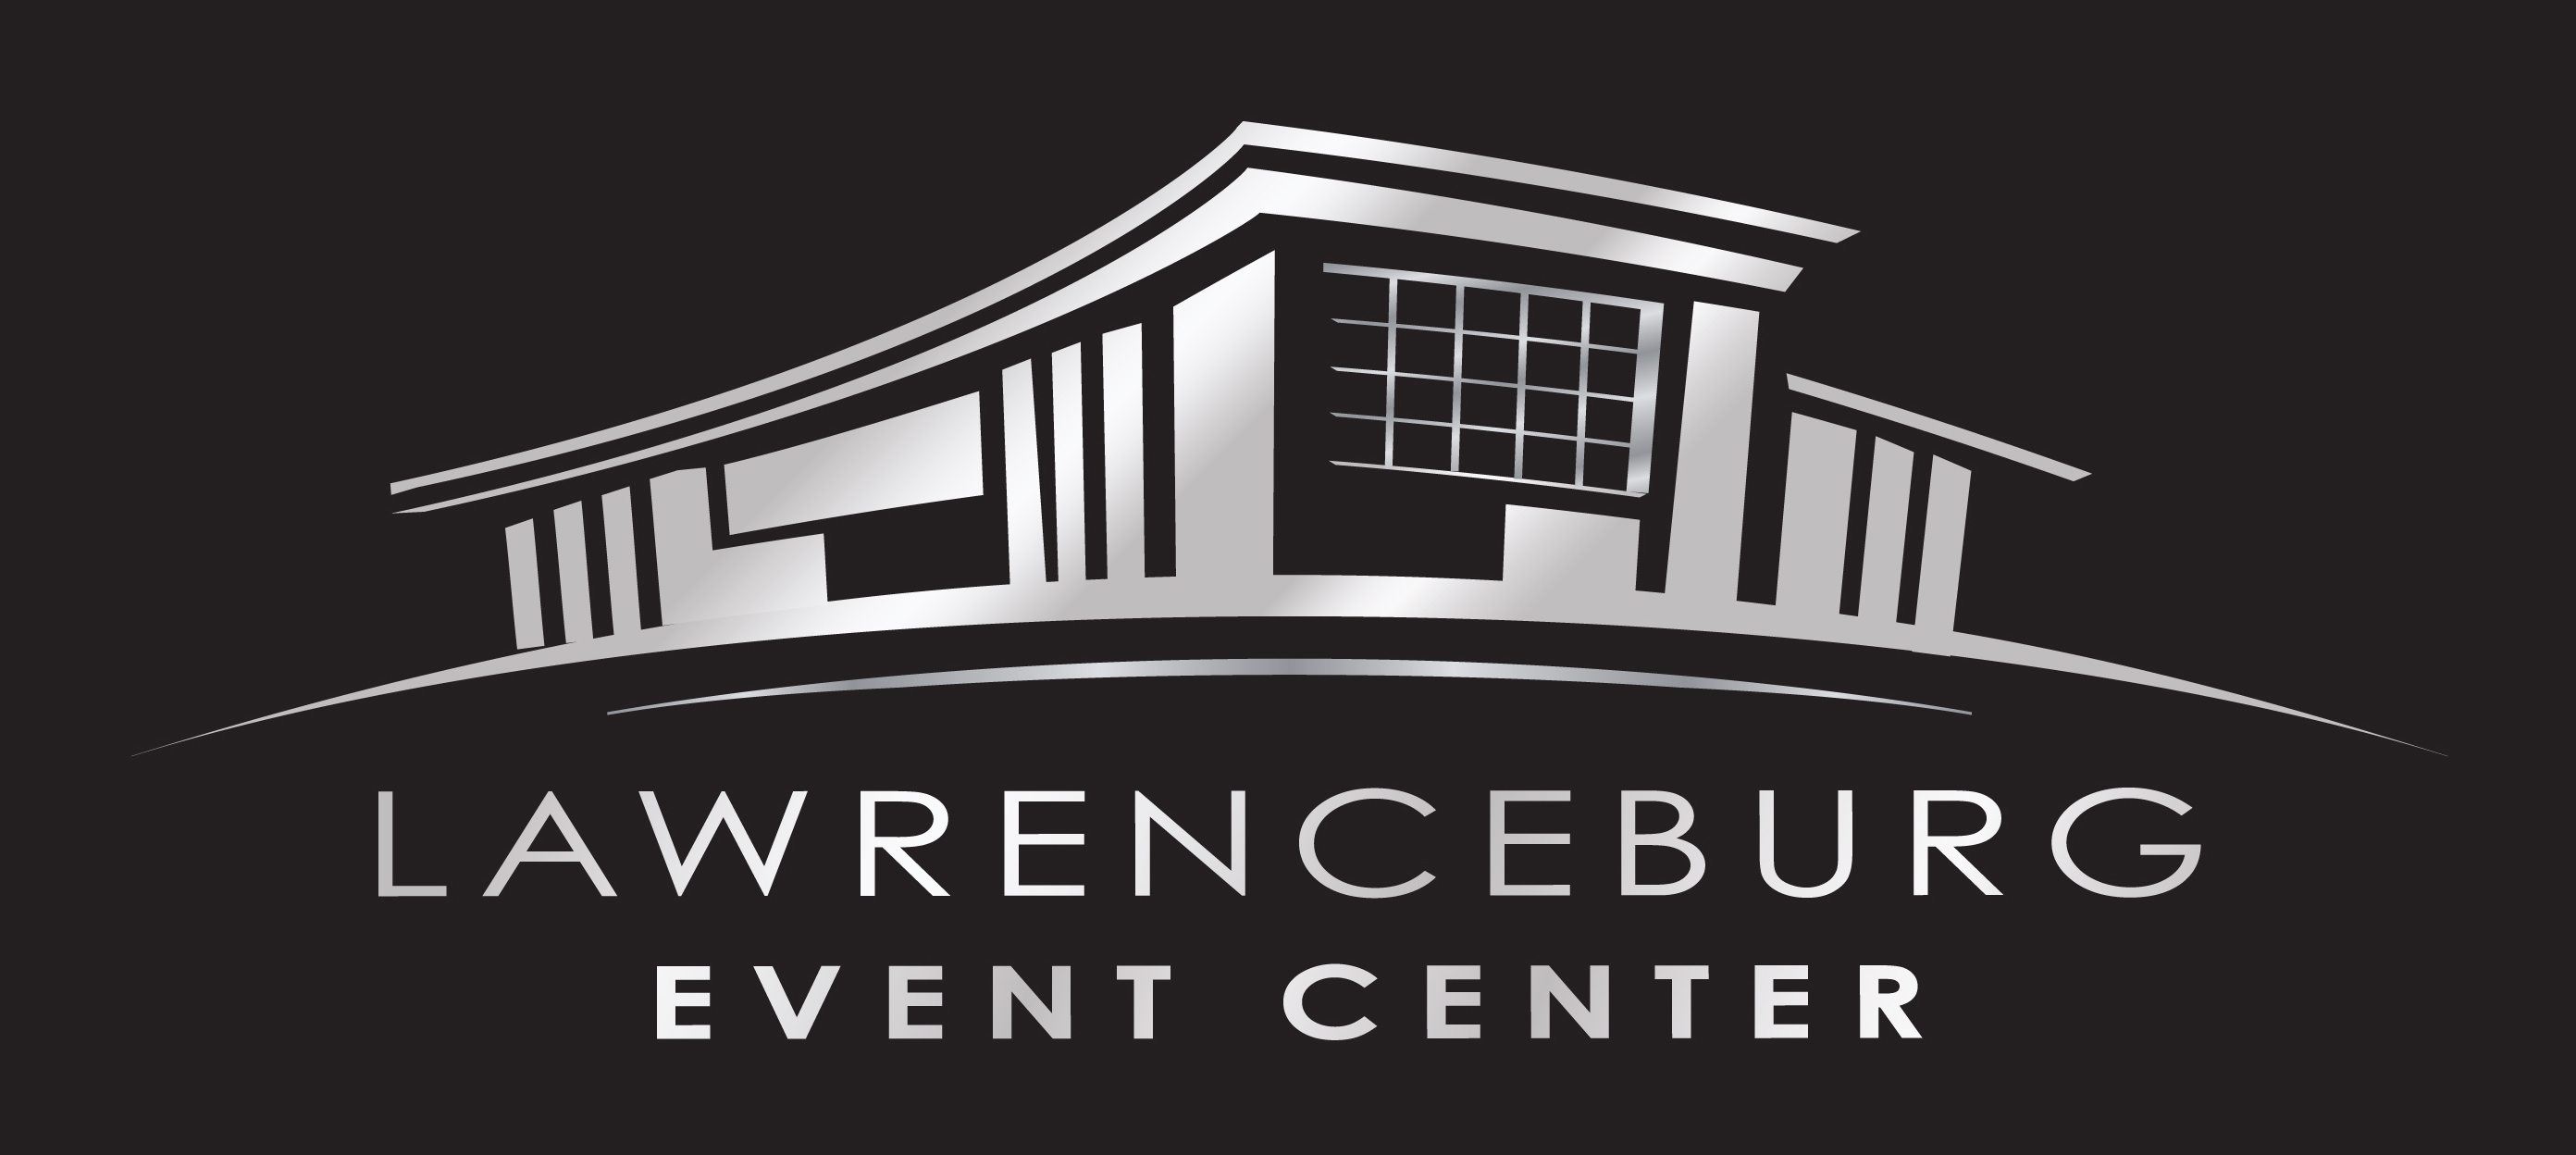 Events Lawrenceburg Event Center Walk Like A Man Tribute